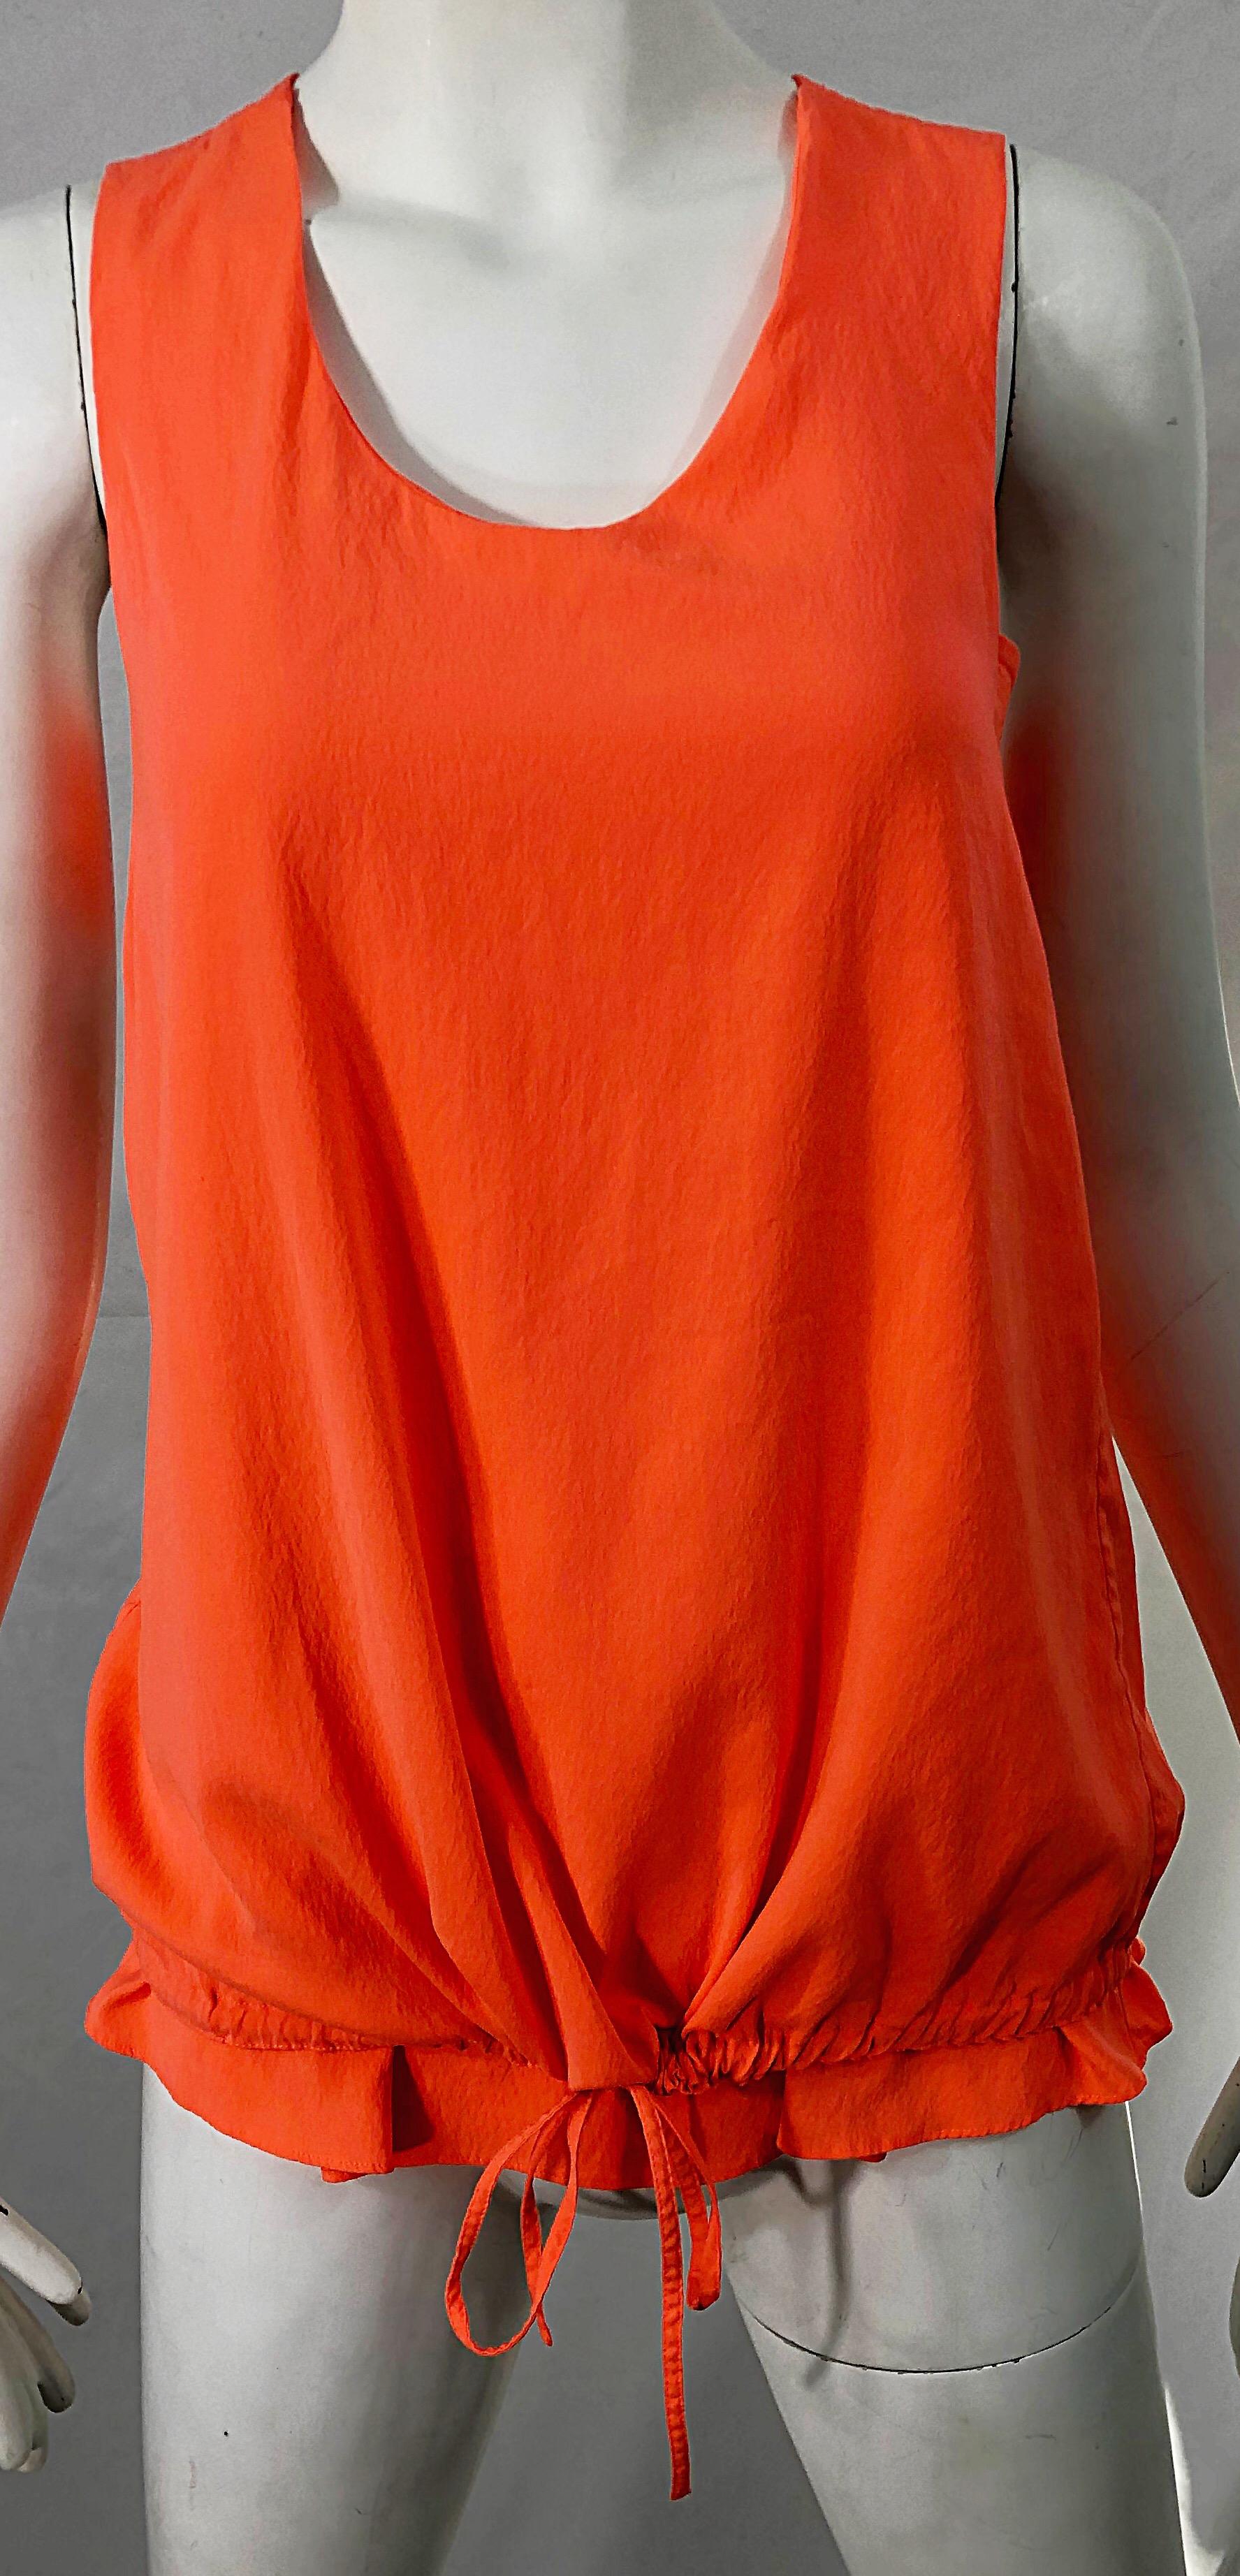 Chloe Spring Summer 2013 Clare Waight Keller Orange Fizz Sleeveless Silk Top  In Excellent Condition For Sale In San Diego, CA